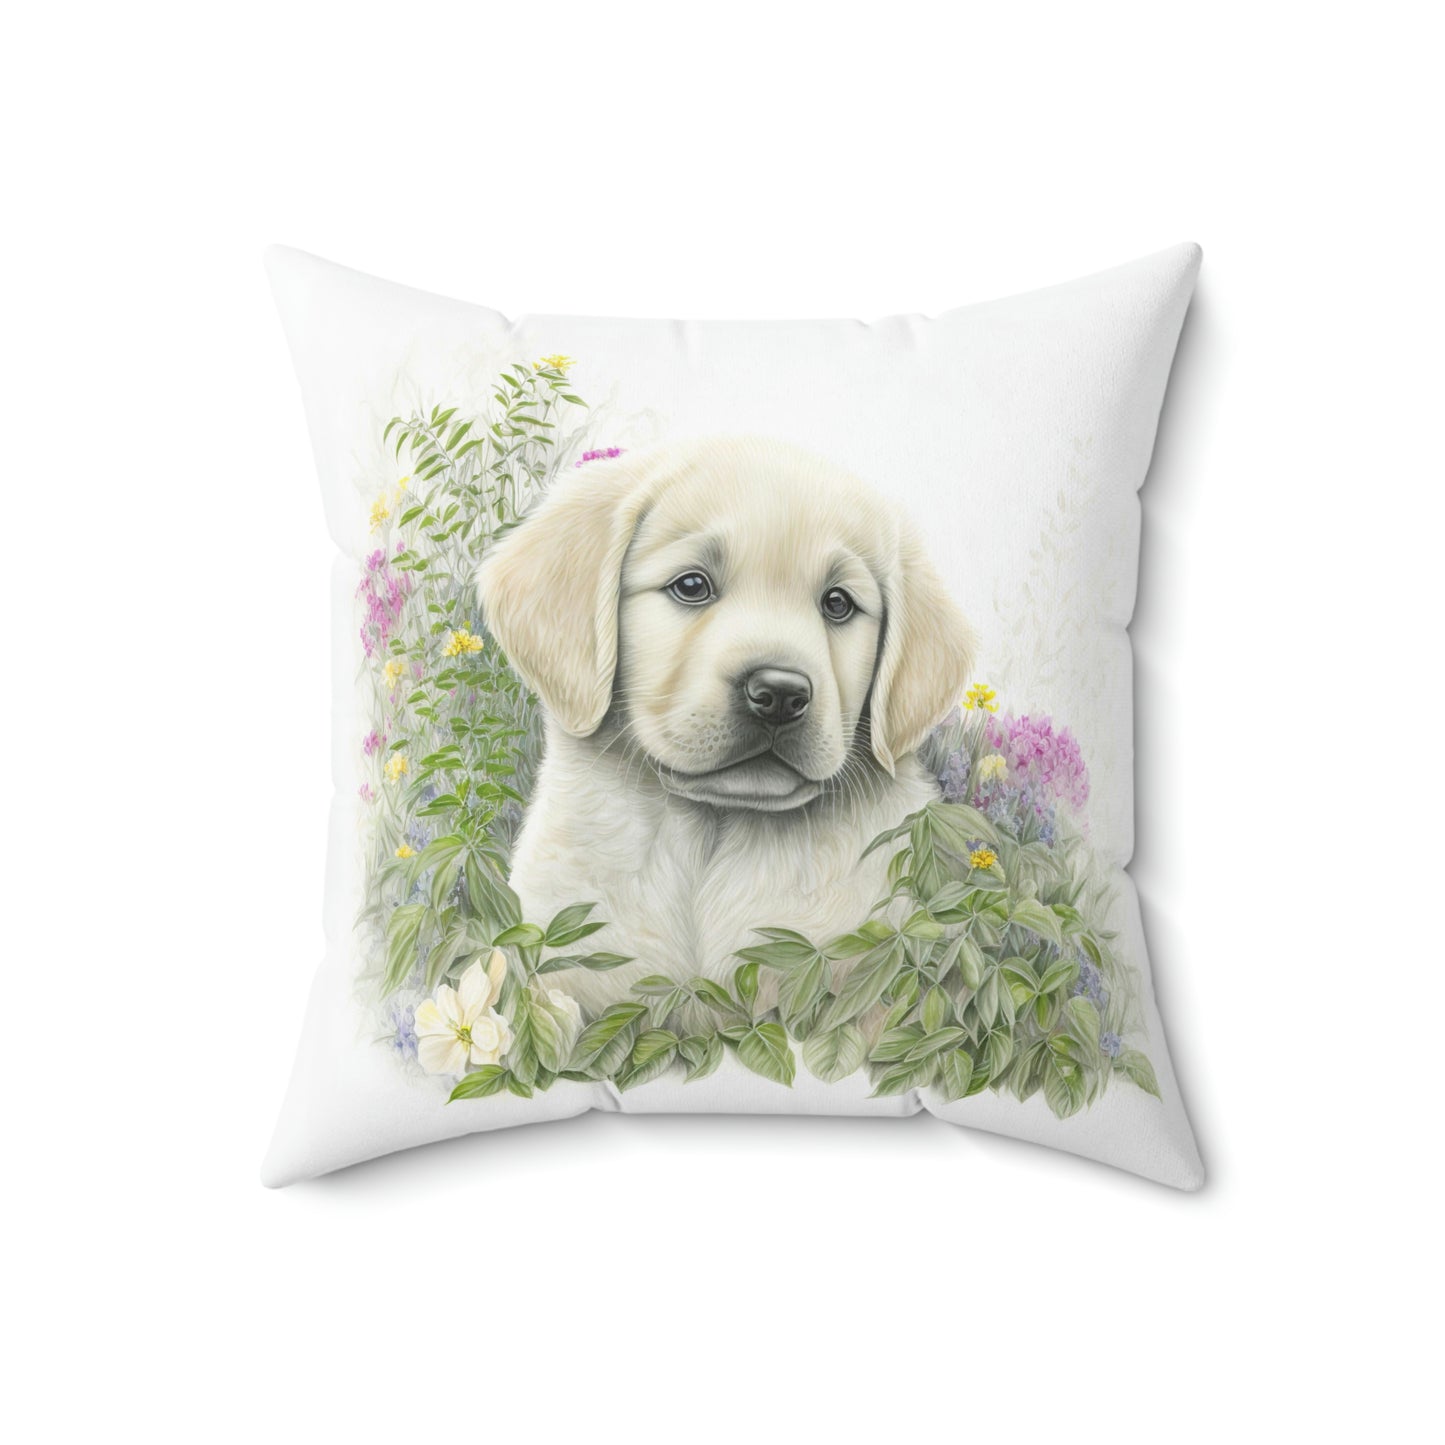 golden retriever accent pillow sitting on a chair, golden retriever puppy pillow displayed on a couch, golden retriever dog pillow on a sofa lounger, square shape puppy throw pillow on a cushion